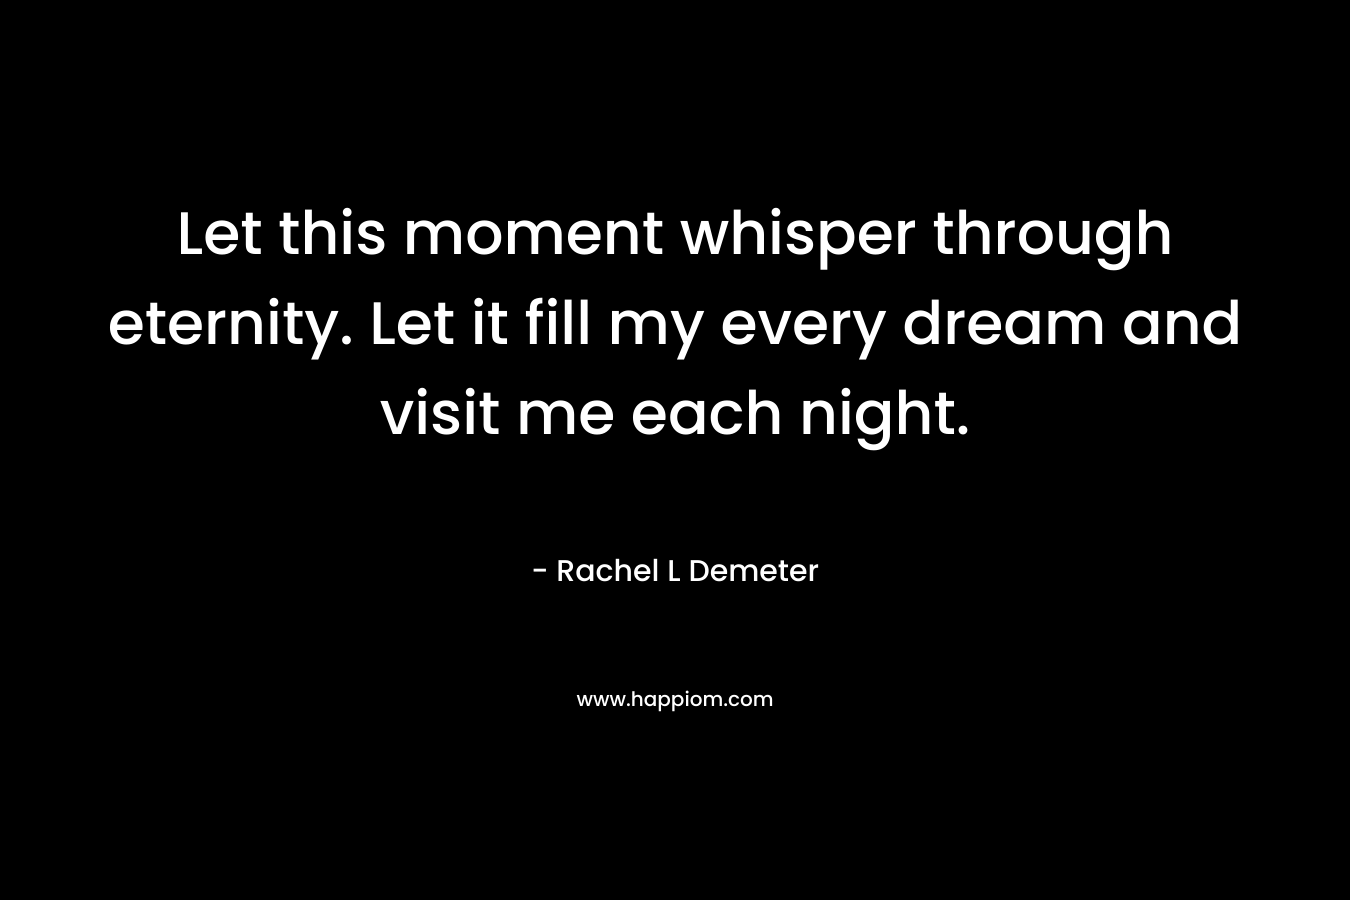 Let this moment whisper through eternity. Let it fill my every dream and visit me each night. – Rachel L Demeter